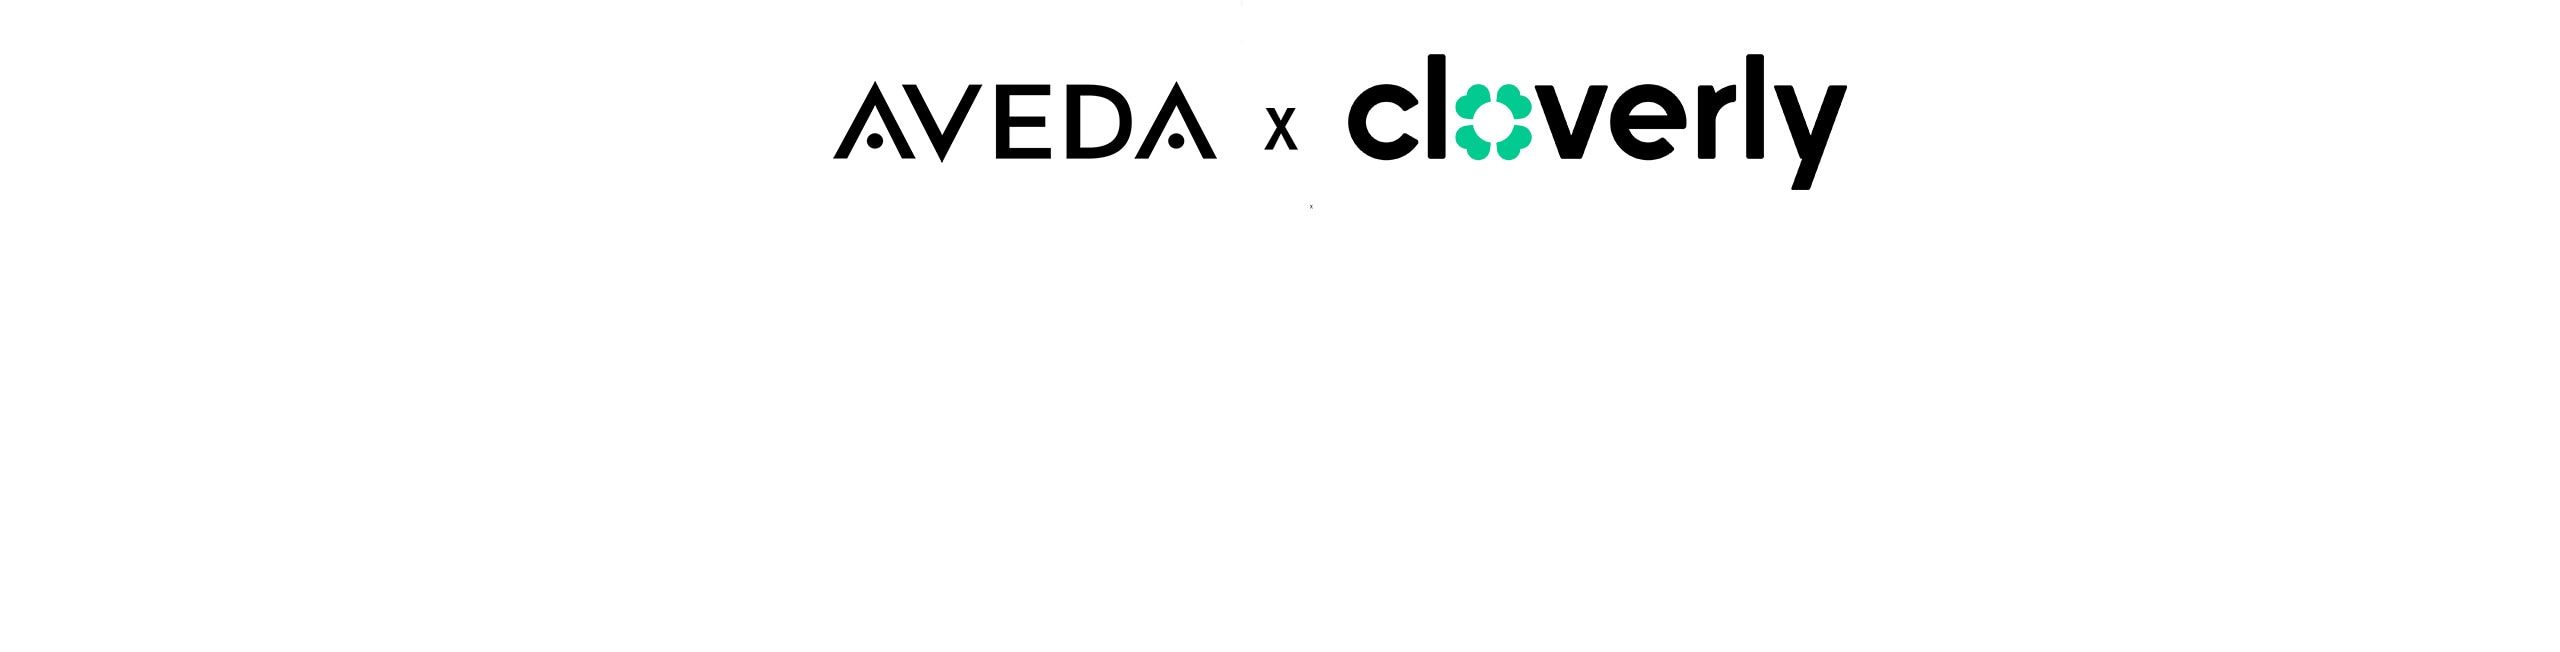 Learn more about Aveda's partnership with Cloverly to estimate carbon emissions from home shipping orders.